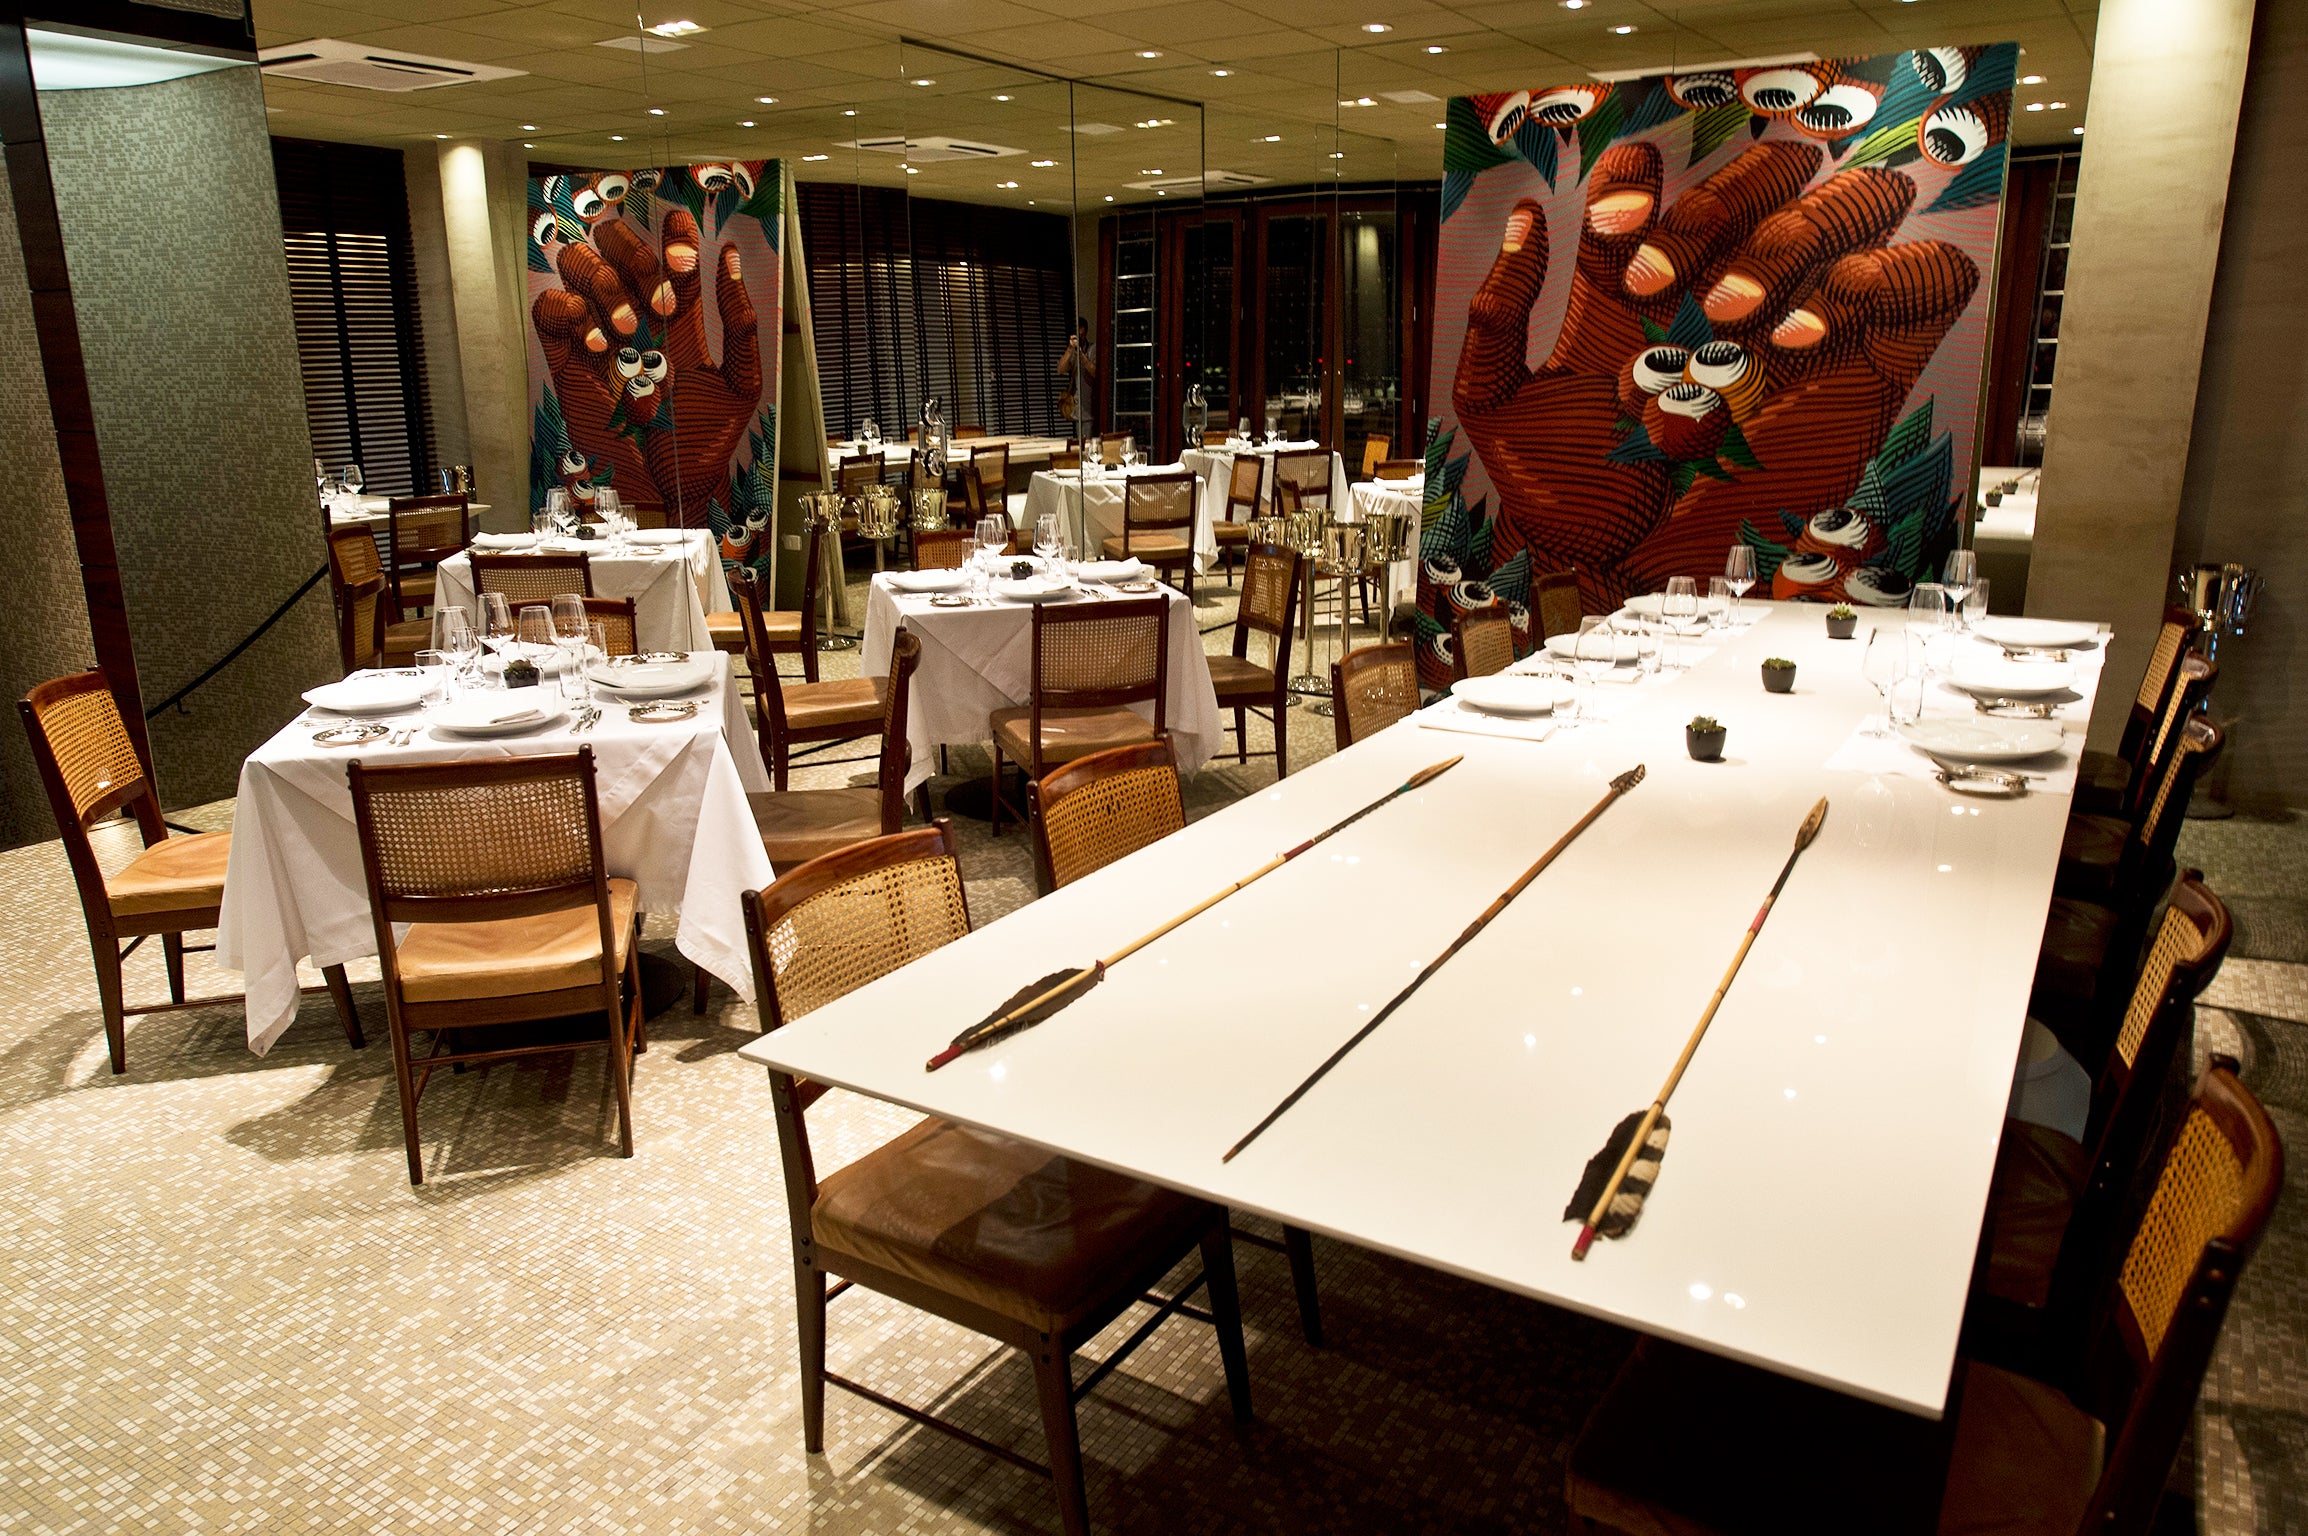 The D.O.M. restaurant is a popular hangout for São Paulo’s wealthiest, needless to say it’s not cheap